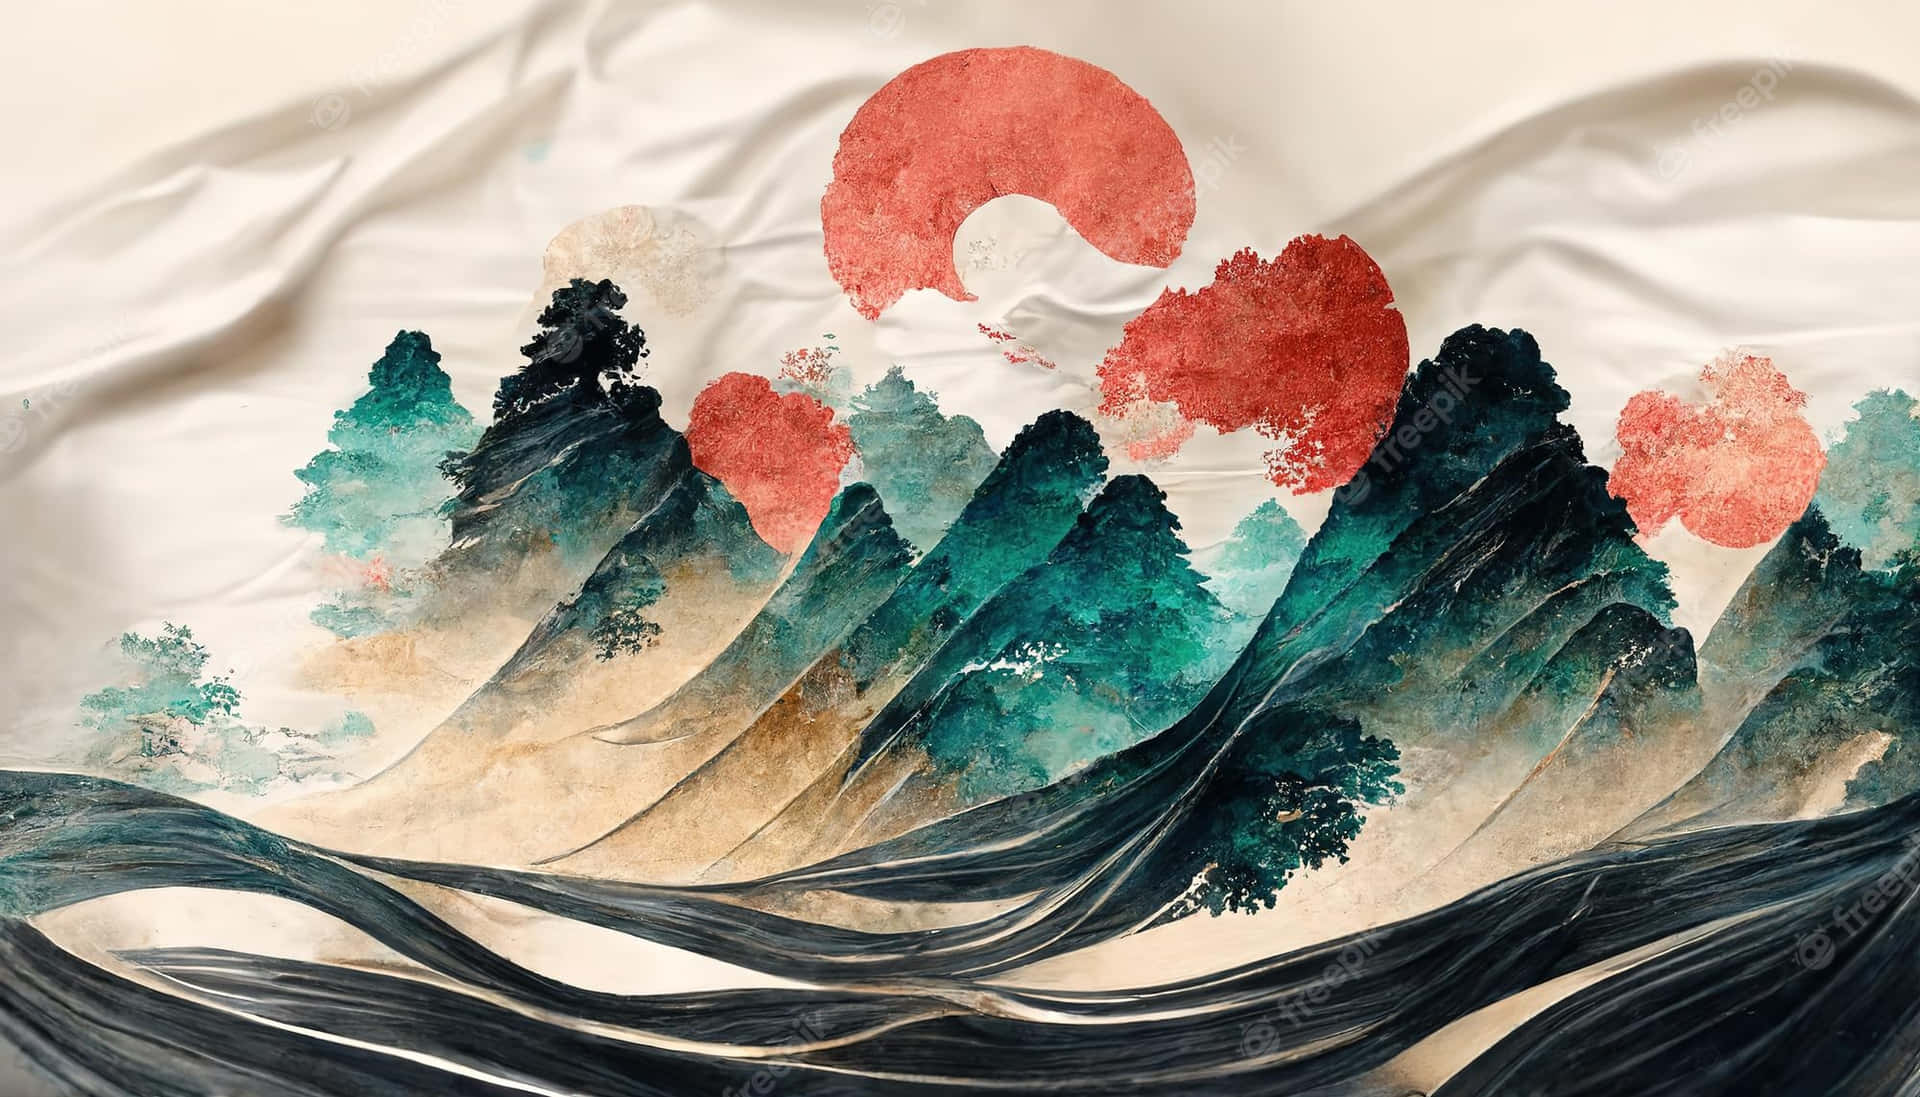 100+] Traditional Japanese Art Wallpapers